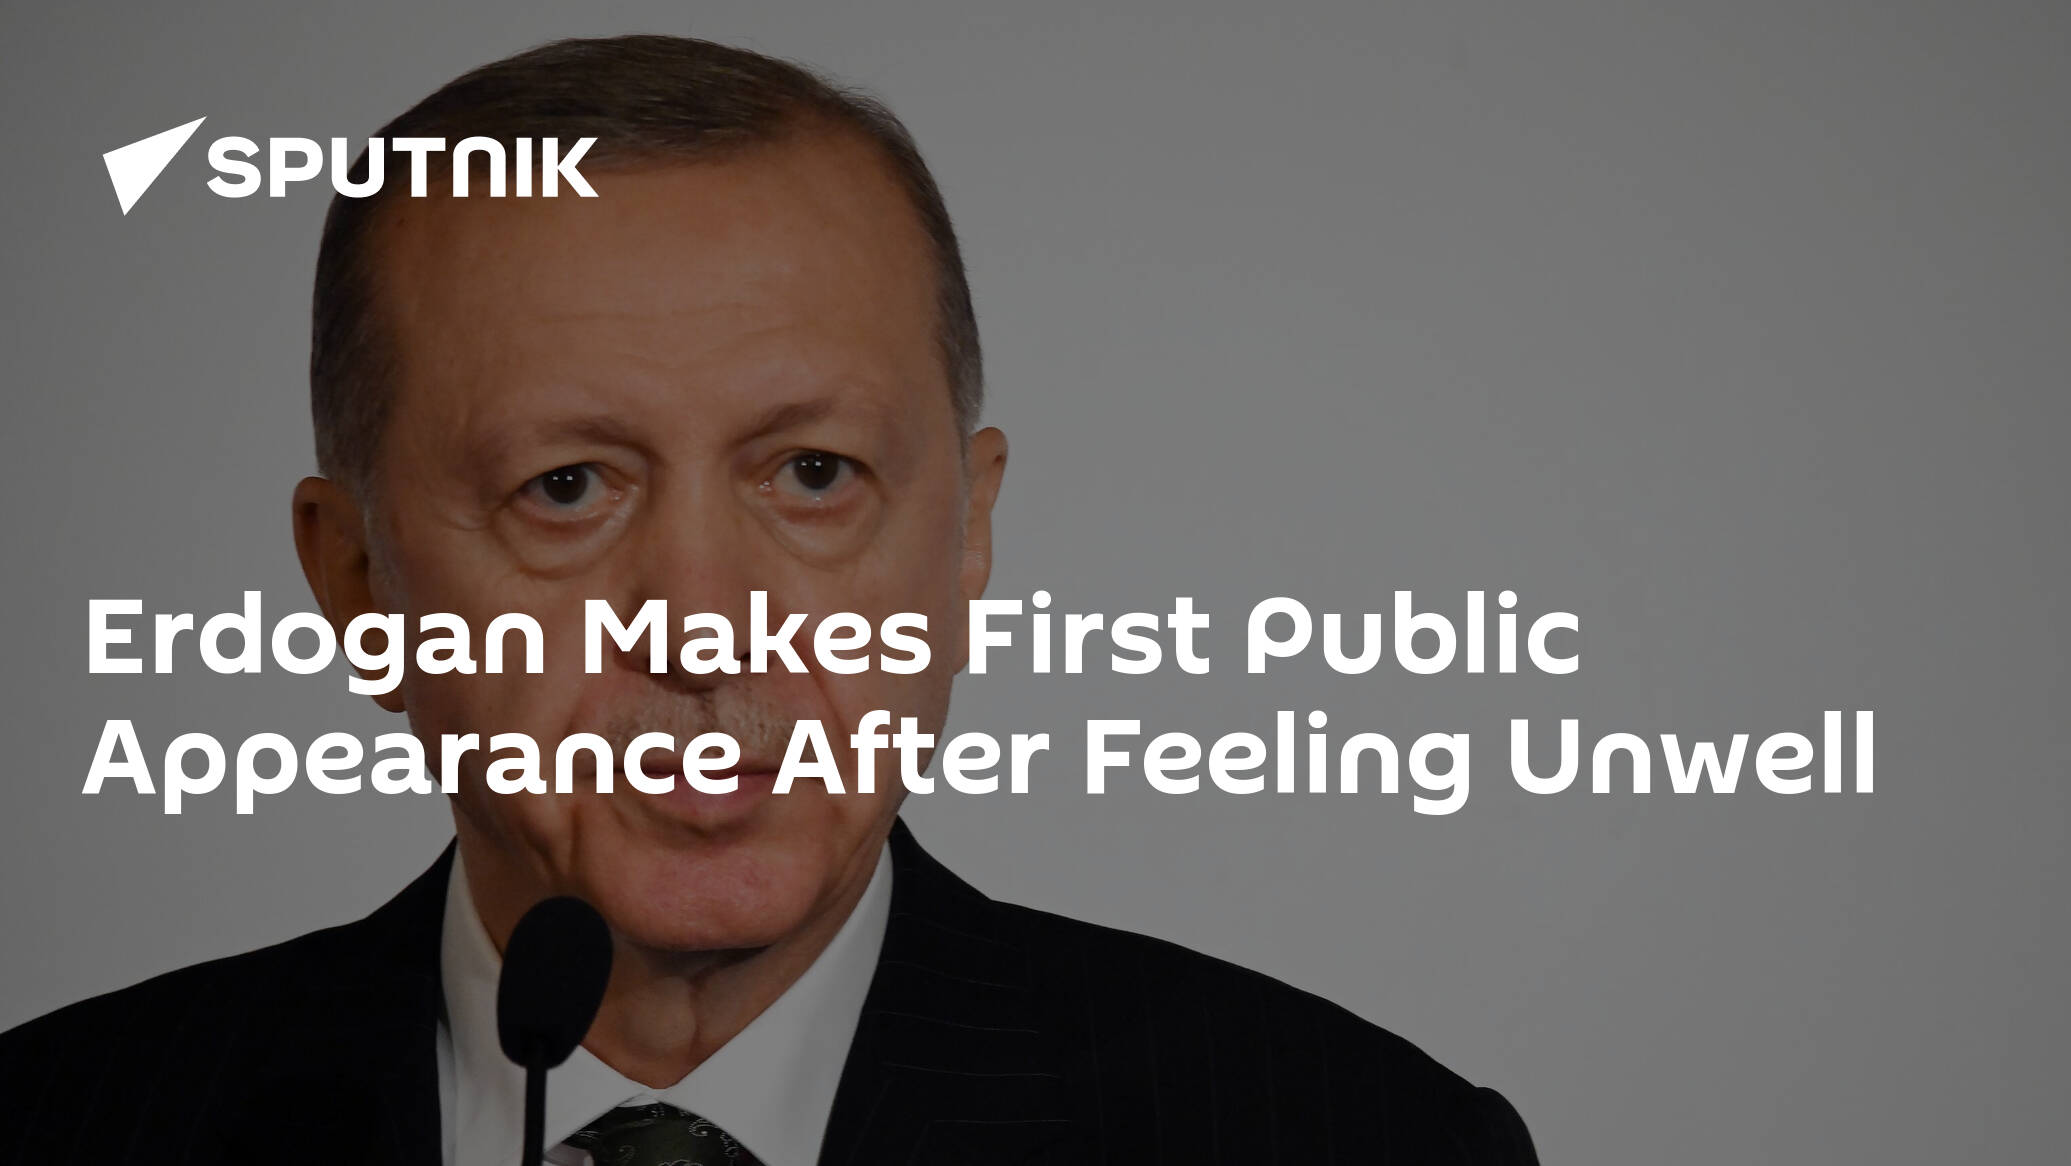 Erdogan Makes First Public Appearance After Feeling Unwell